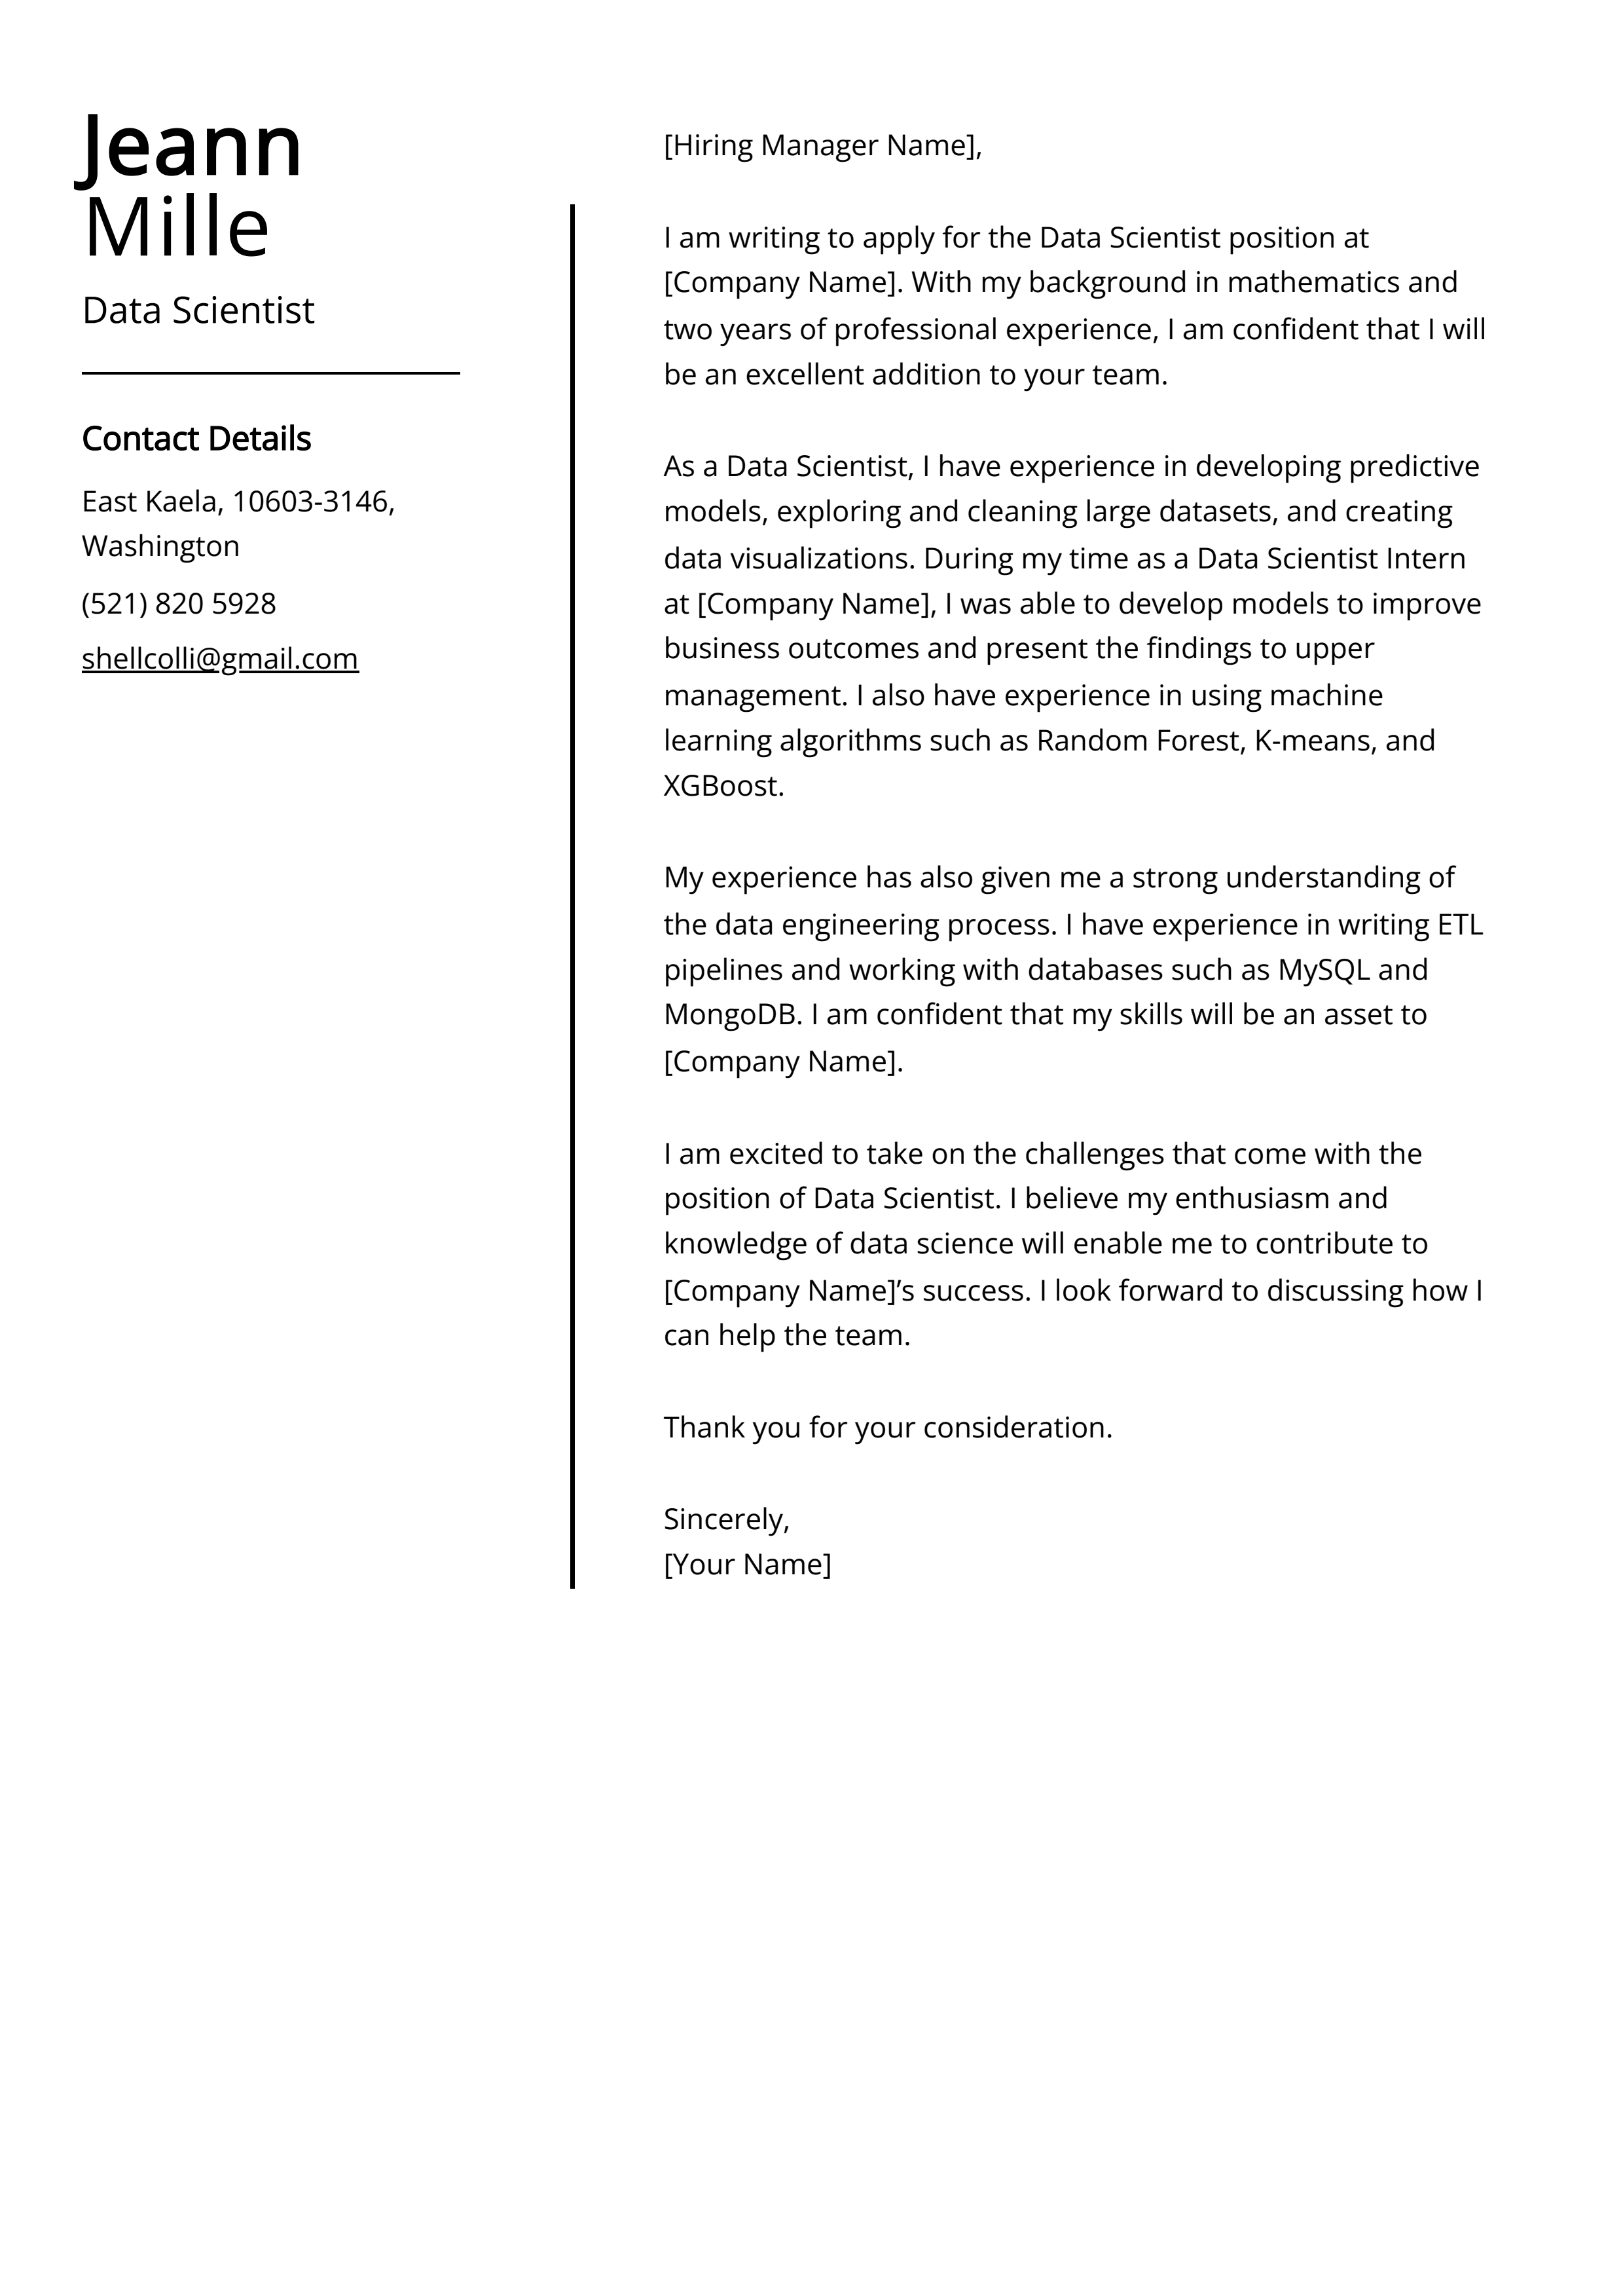 Data Scientist Cover Letter Example